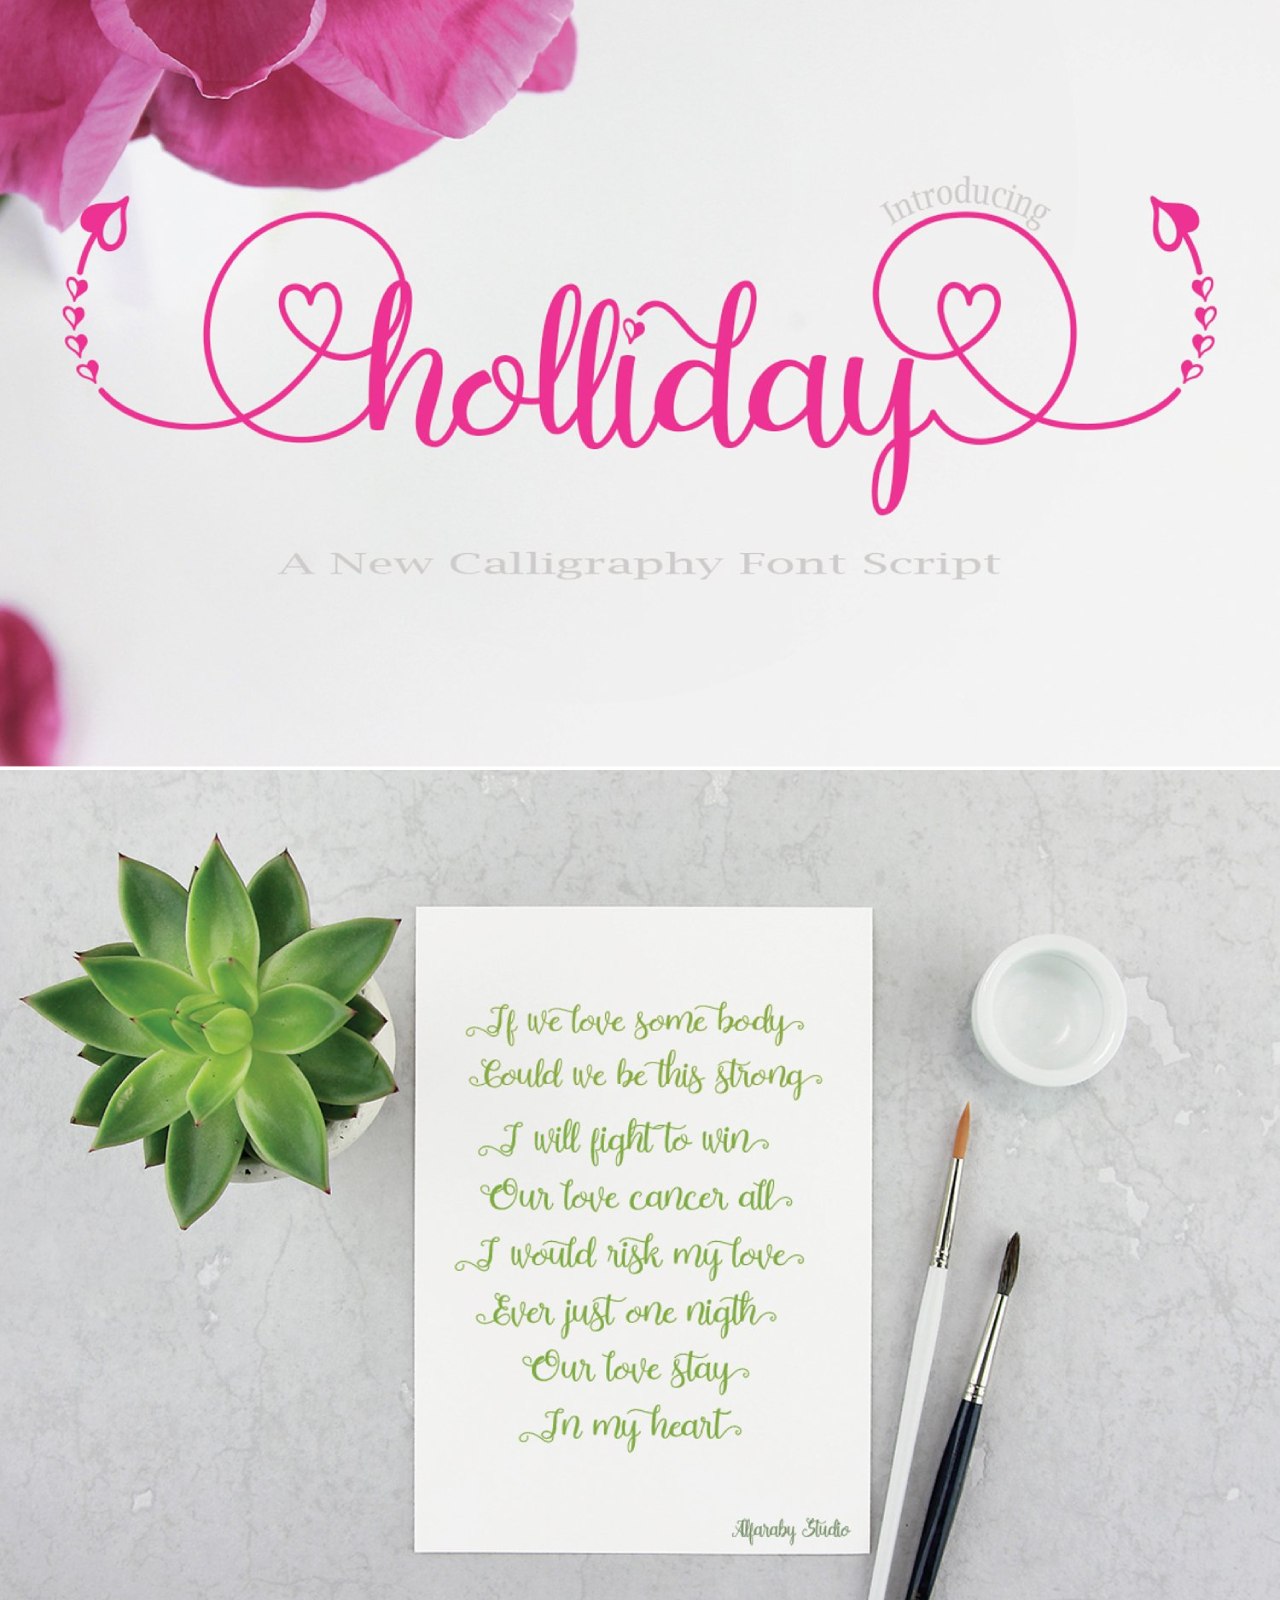 Holiday font pinterest image preview.